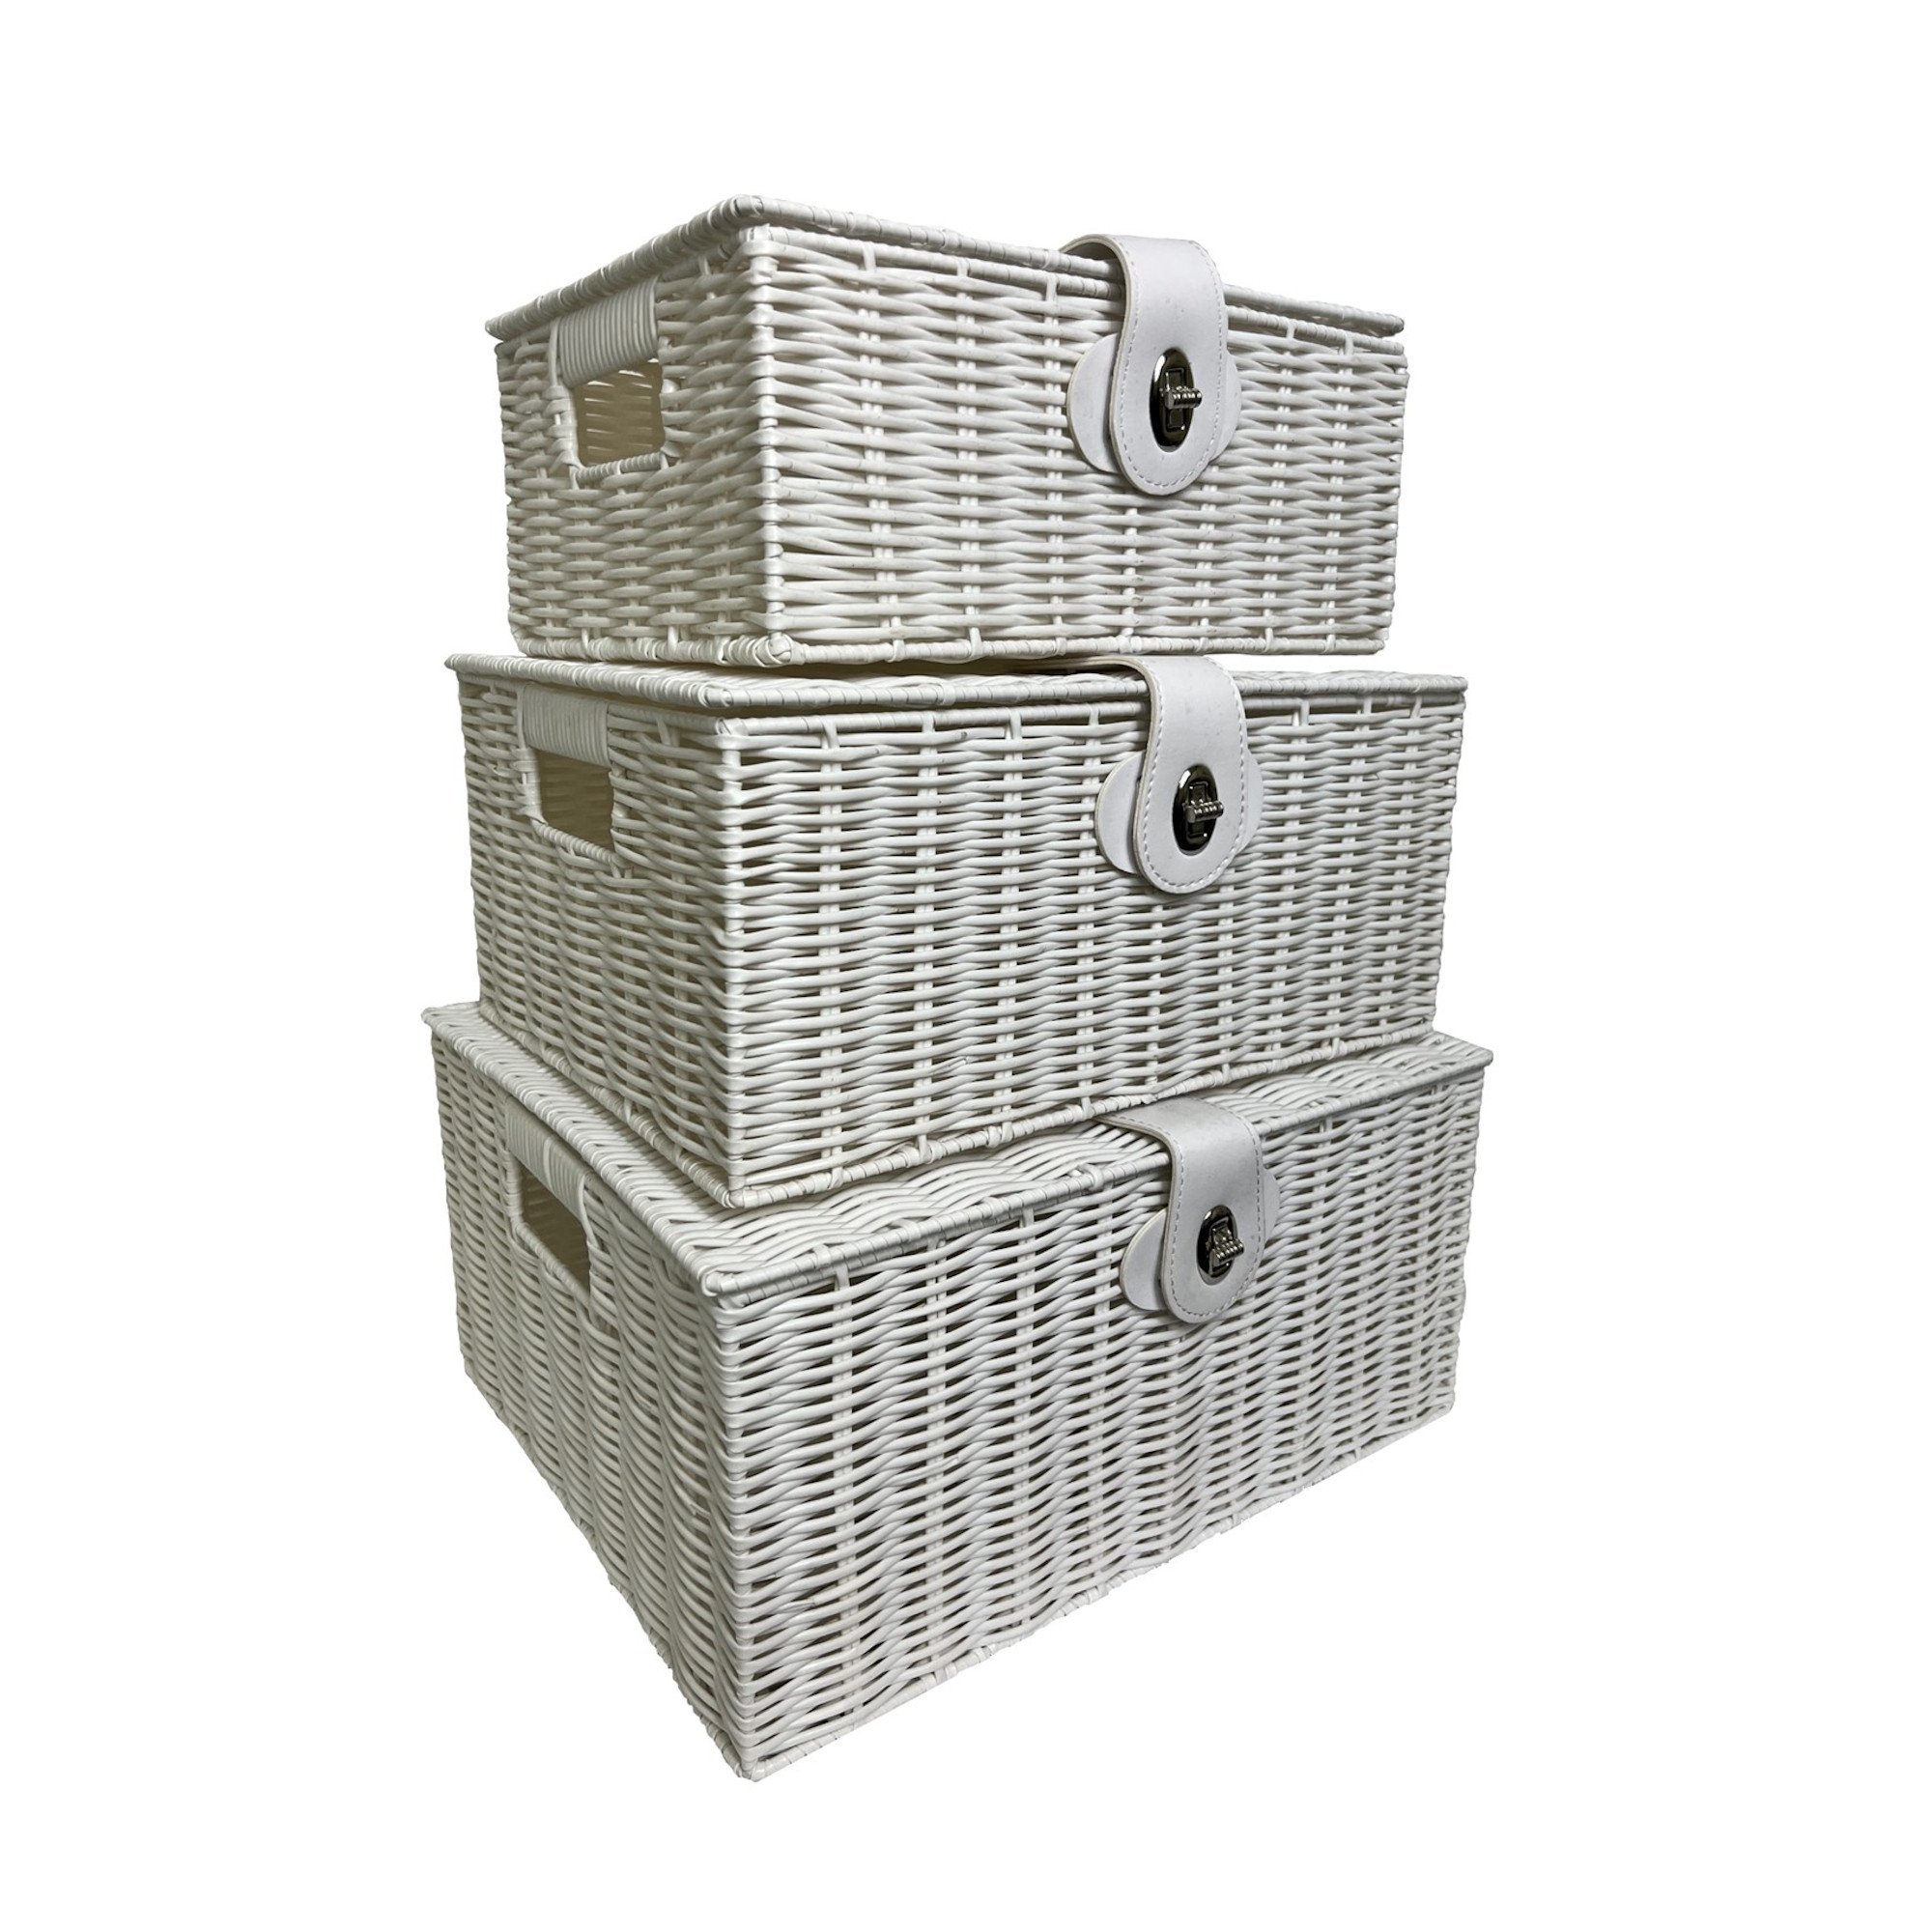 Set of 3 White Resin Woven Wicker Style Baskets Hampers Storage Boxes